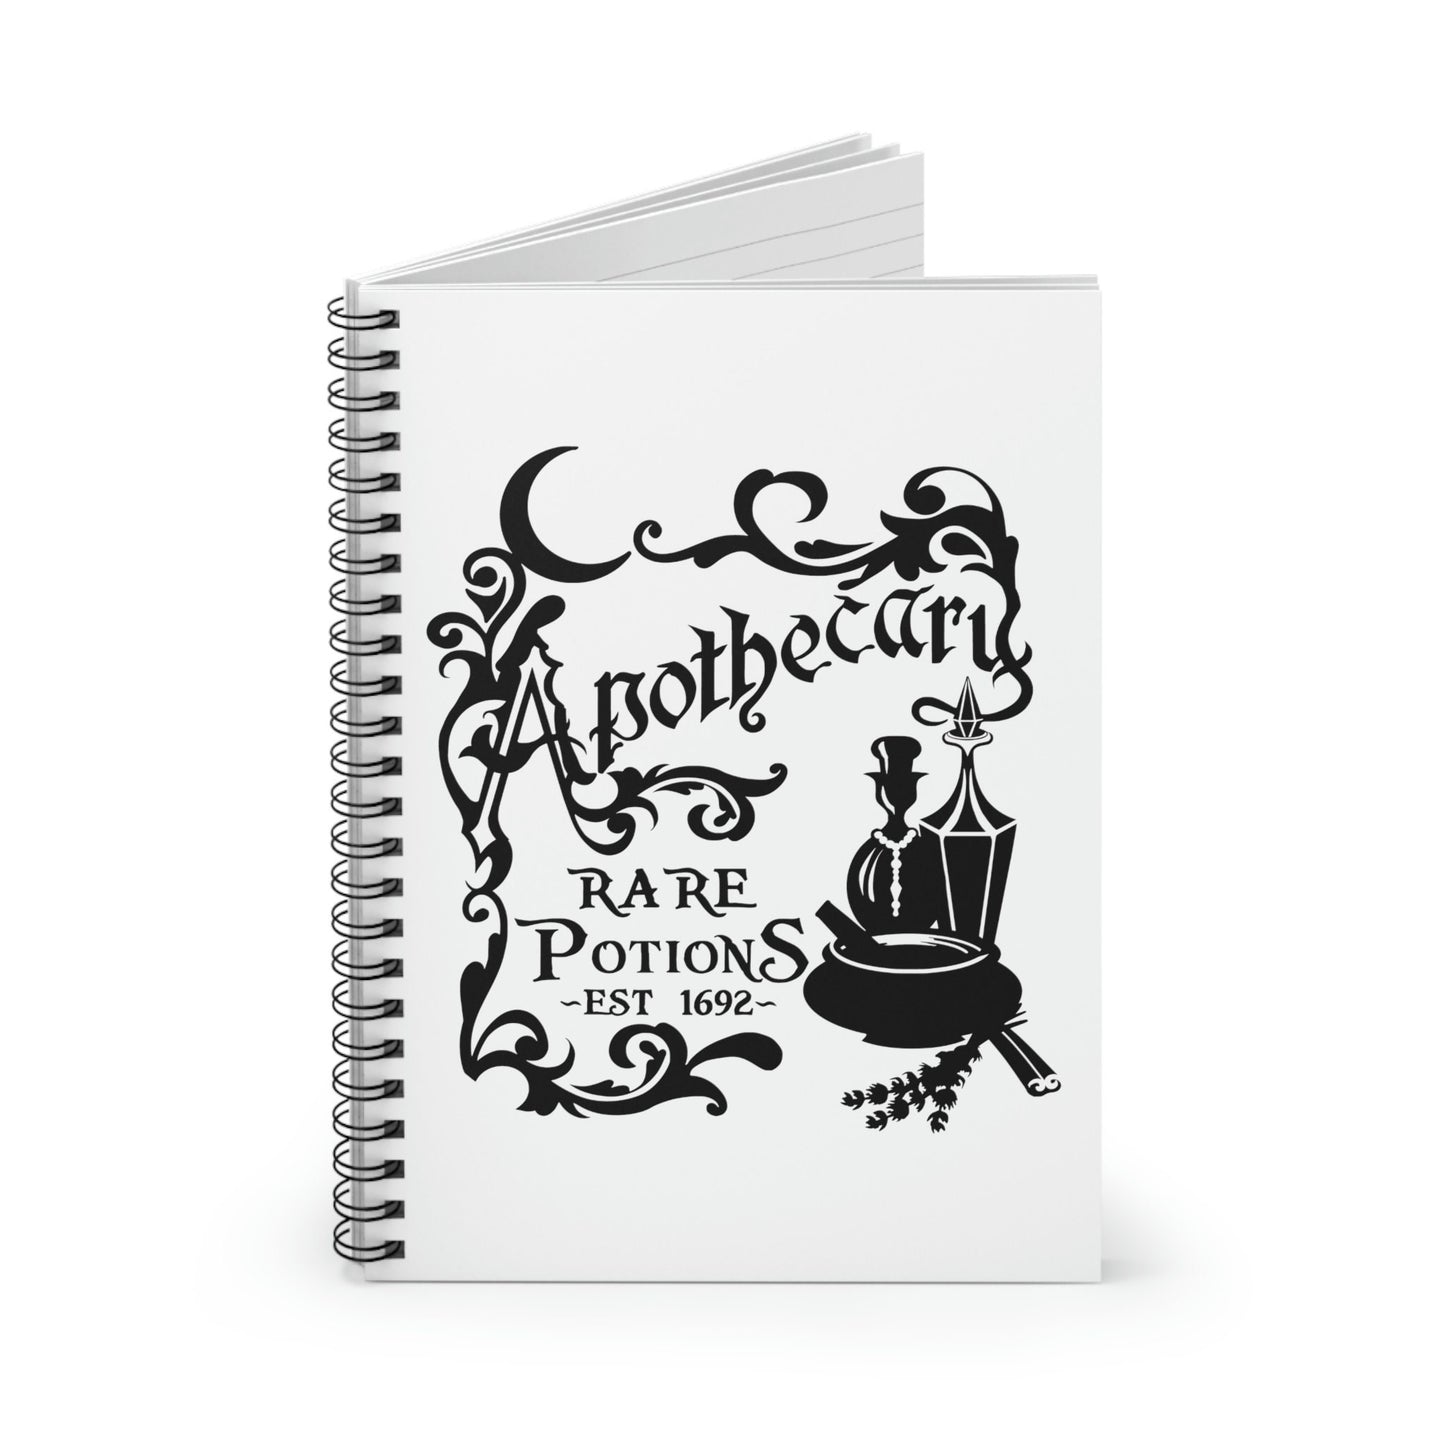 Apothekary Rare Potion Spiral Notebook - Ruled Line